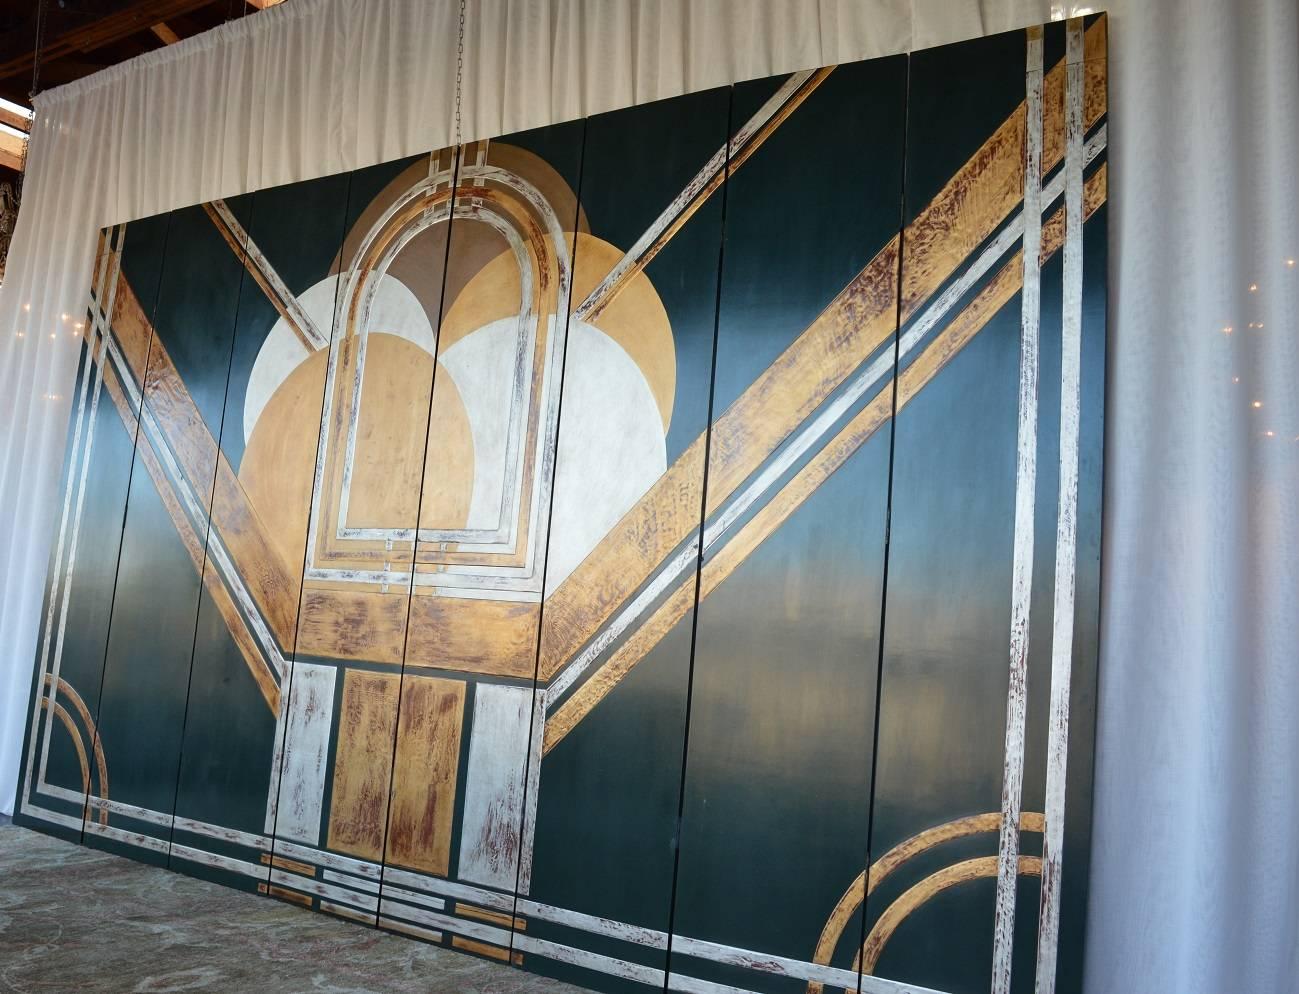 Large American Art Deco screen. Screen is detailed with antiqued golds and silvers. Each panel is 18 inches wide.